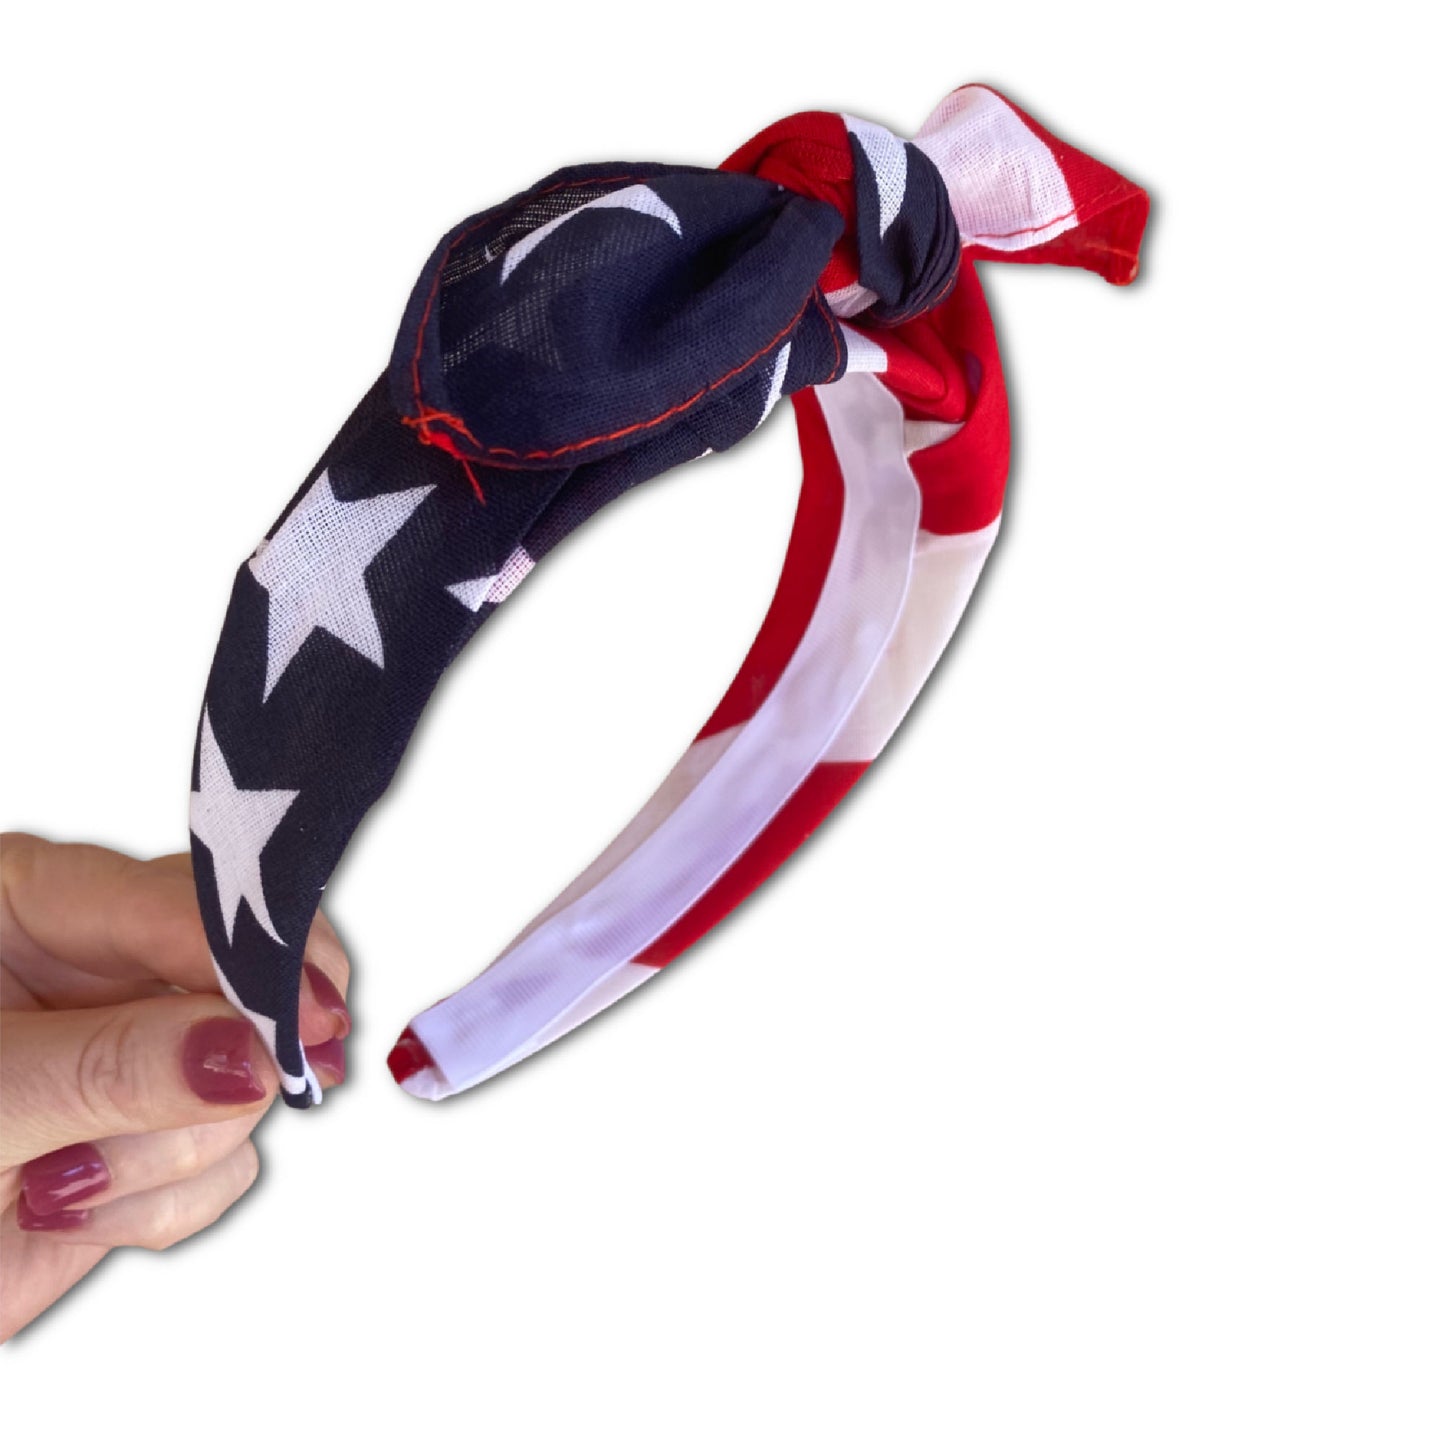 Wide patriotic USA flag that has been pre tied at top. Features Stars on one side and red and white stripes on the other side.